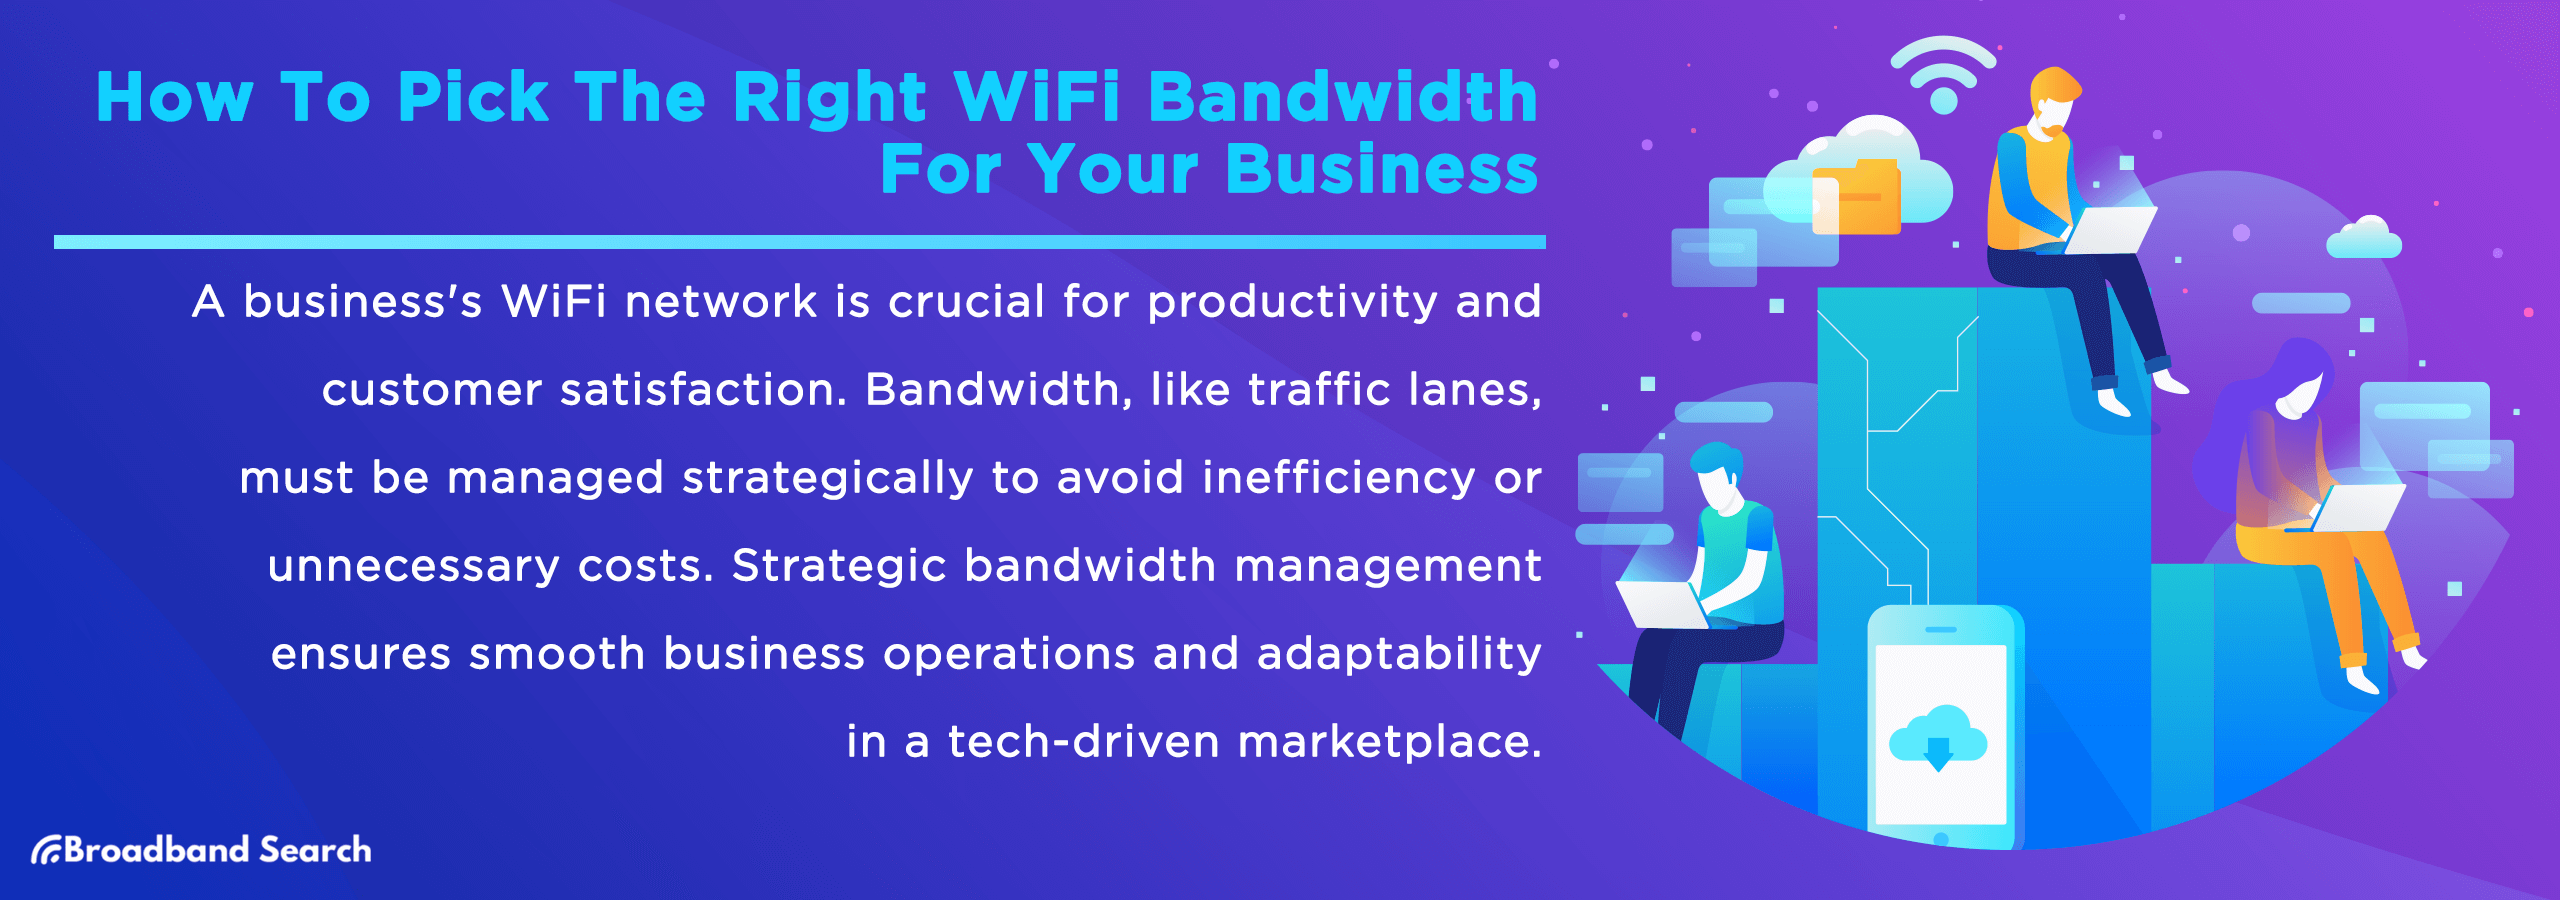 How to Pick the Right Wi-Fi Bandwidth for Your Business